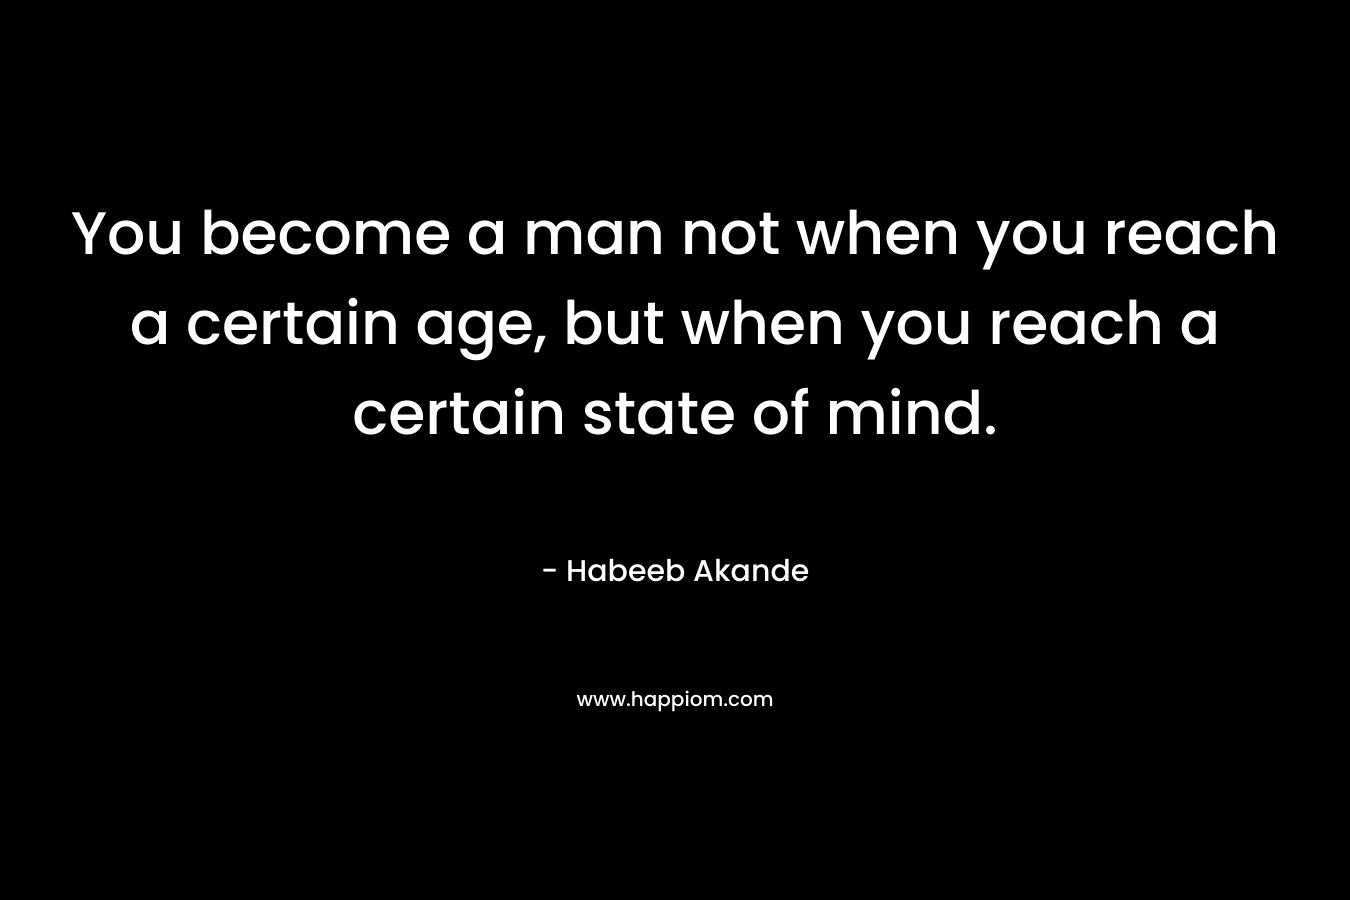 You become a man not when you reach a certain age, but when you reach a certain state of mind.